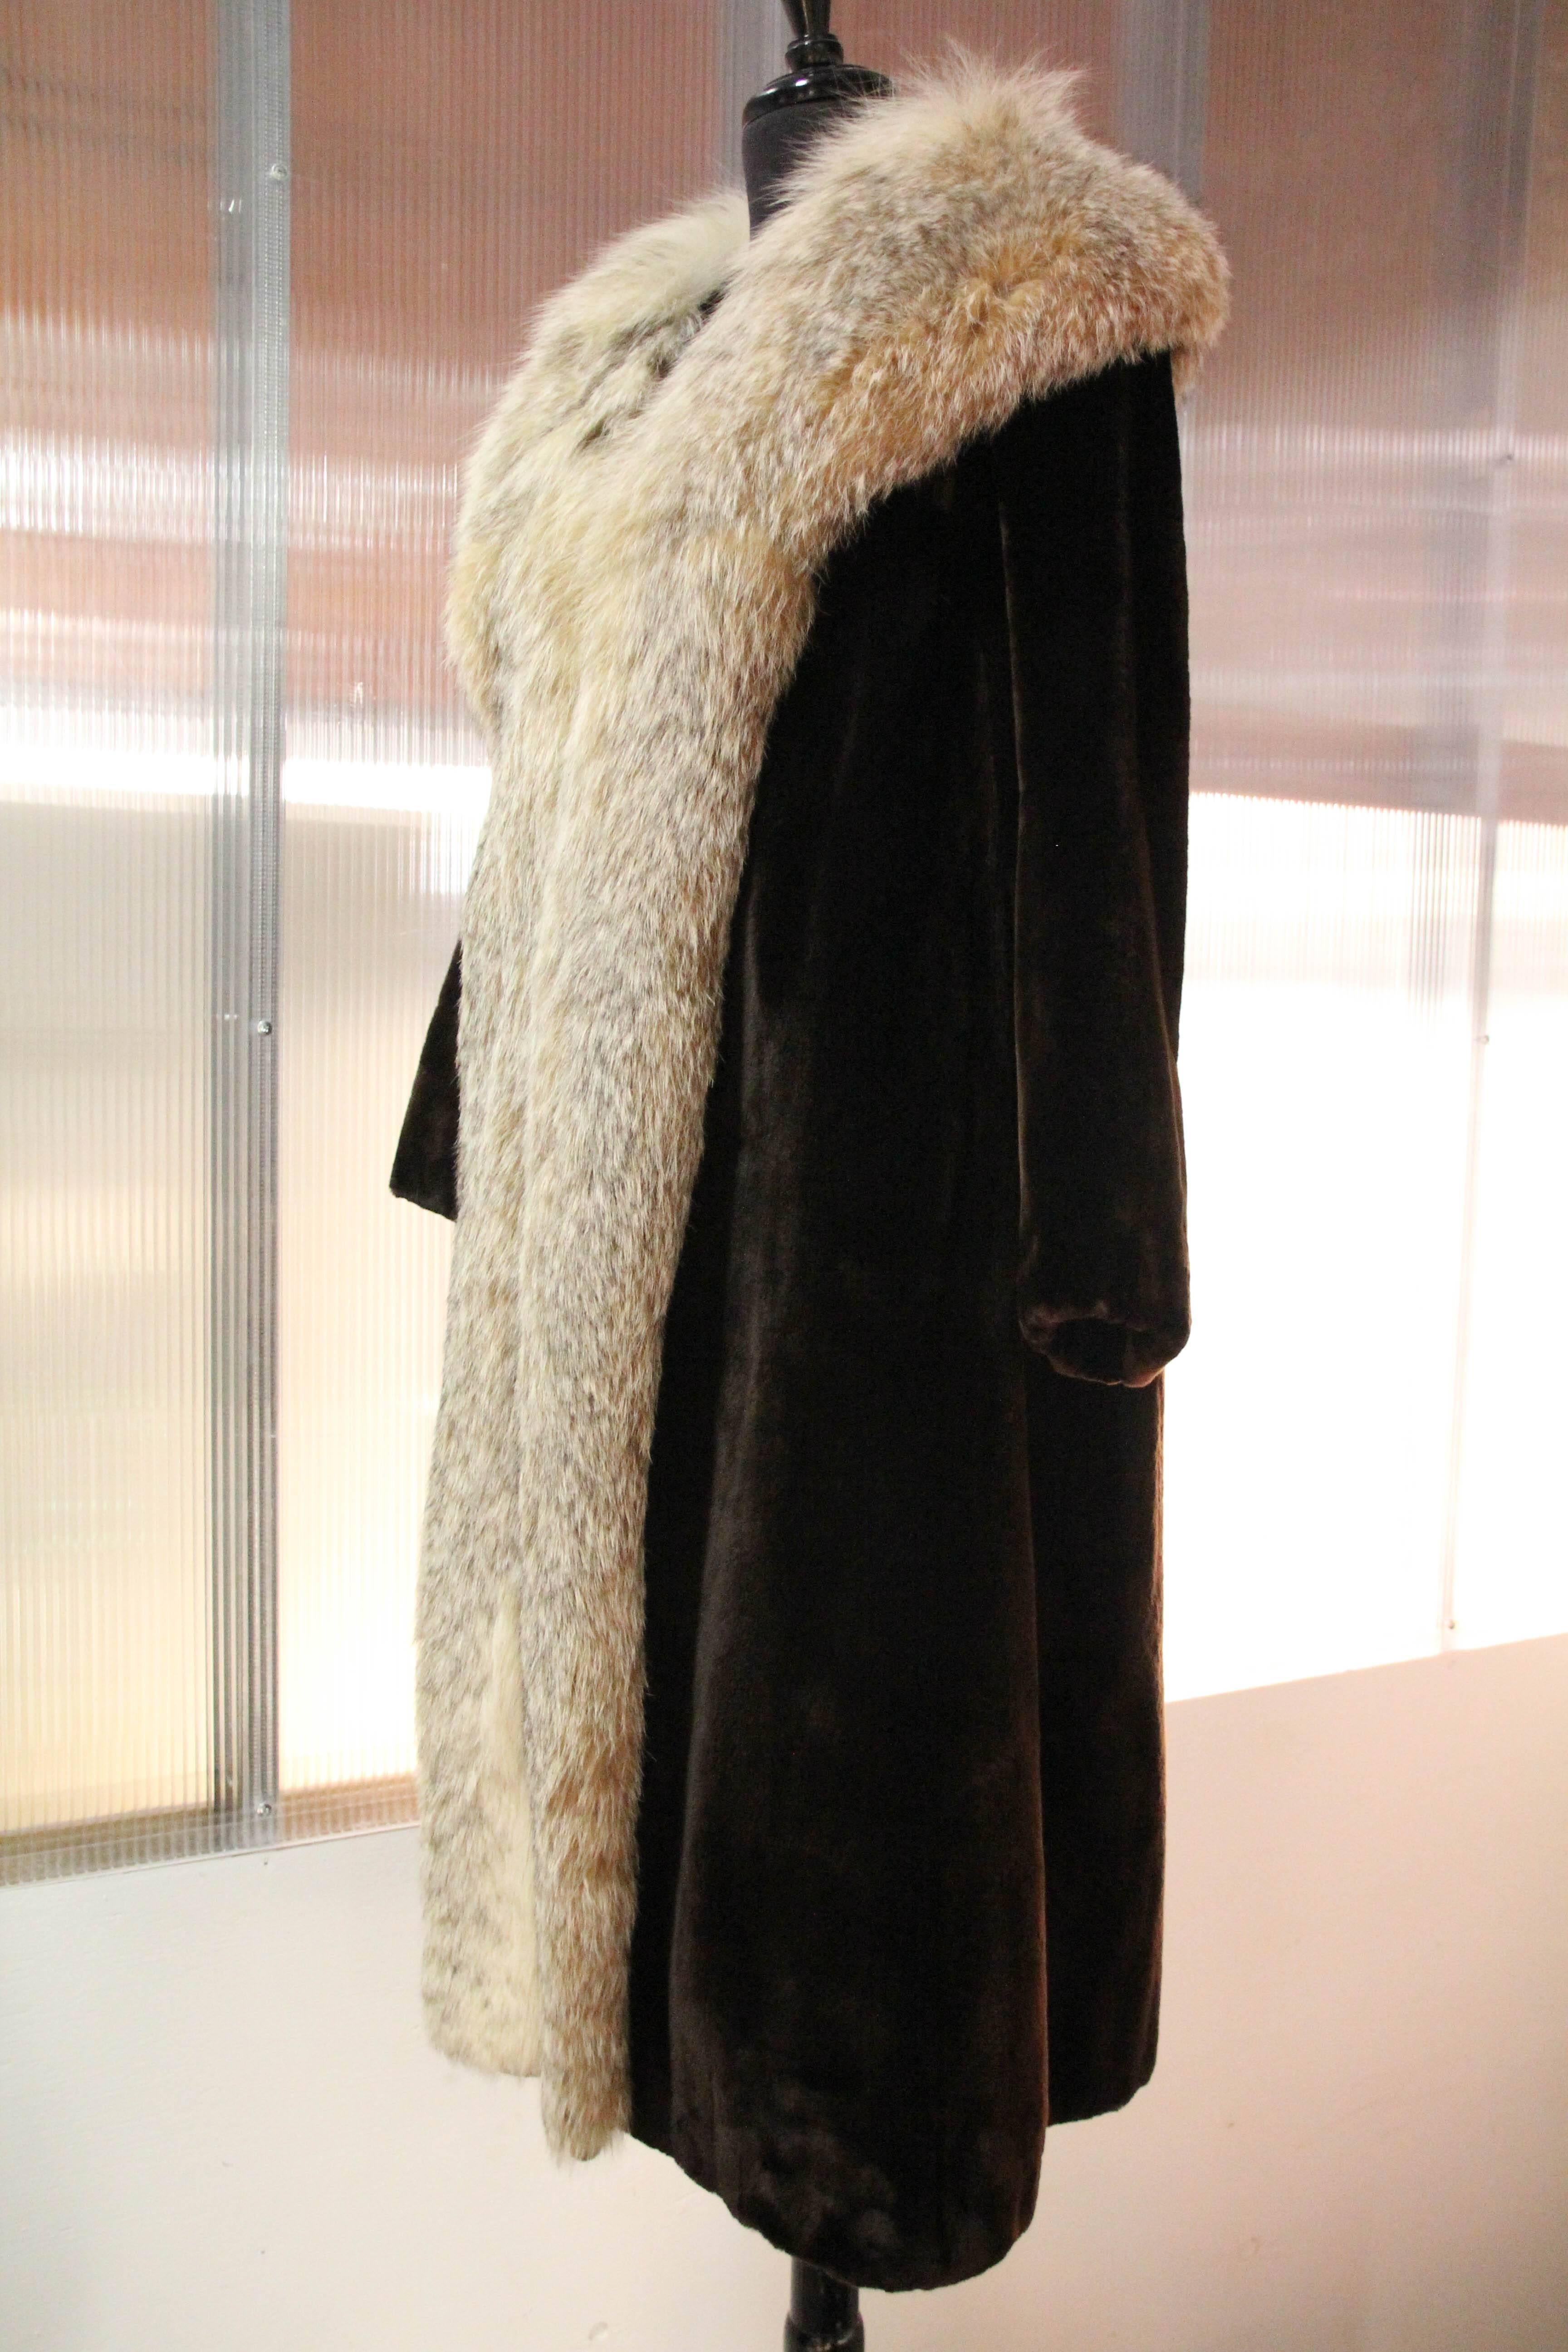 1960s Sheared beaver coat with plush Lynx collar and trim. silk lined. Made by Herbert's, San Francisco's finest fur salon at the time.  Bracelet length sleeves. Fits up to a size 12.